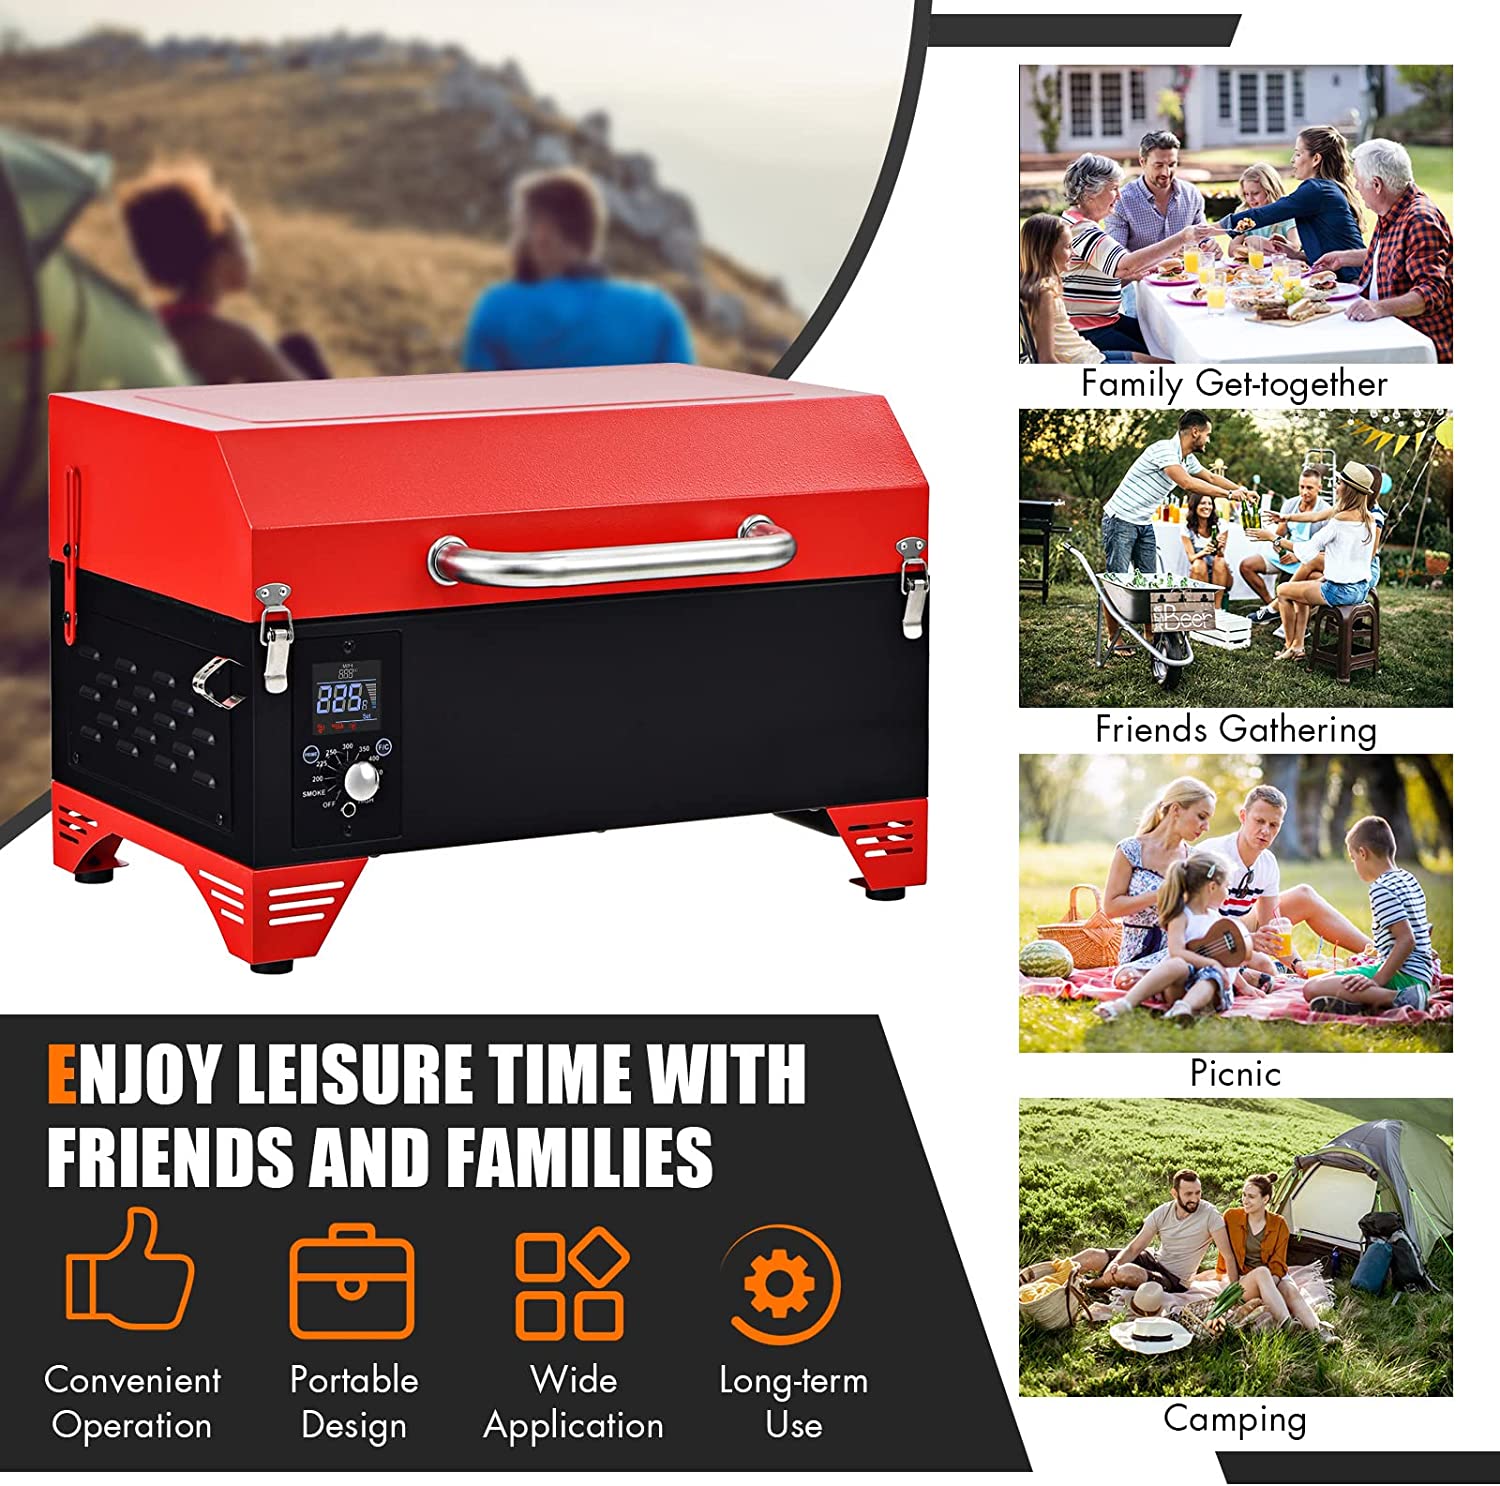 Chairliving Outdoor Portable 8-in-1 Tabletop Pellet Grill and Smoker with Control Panel for BBQ Camping RV Cooking